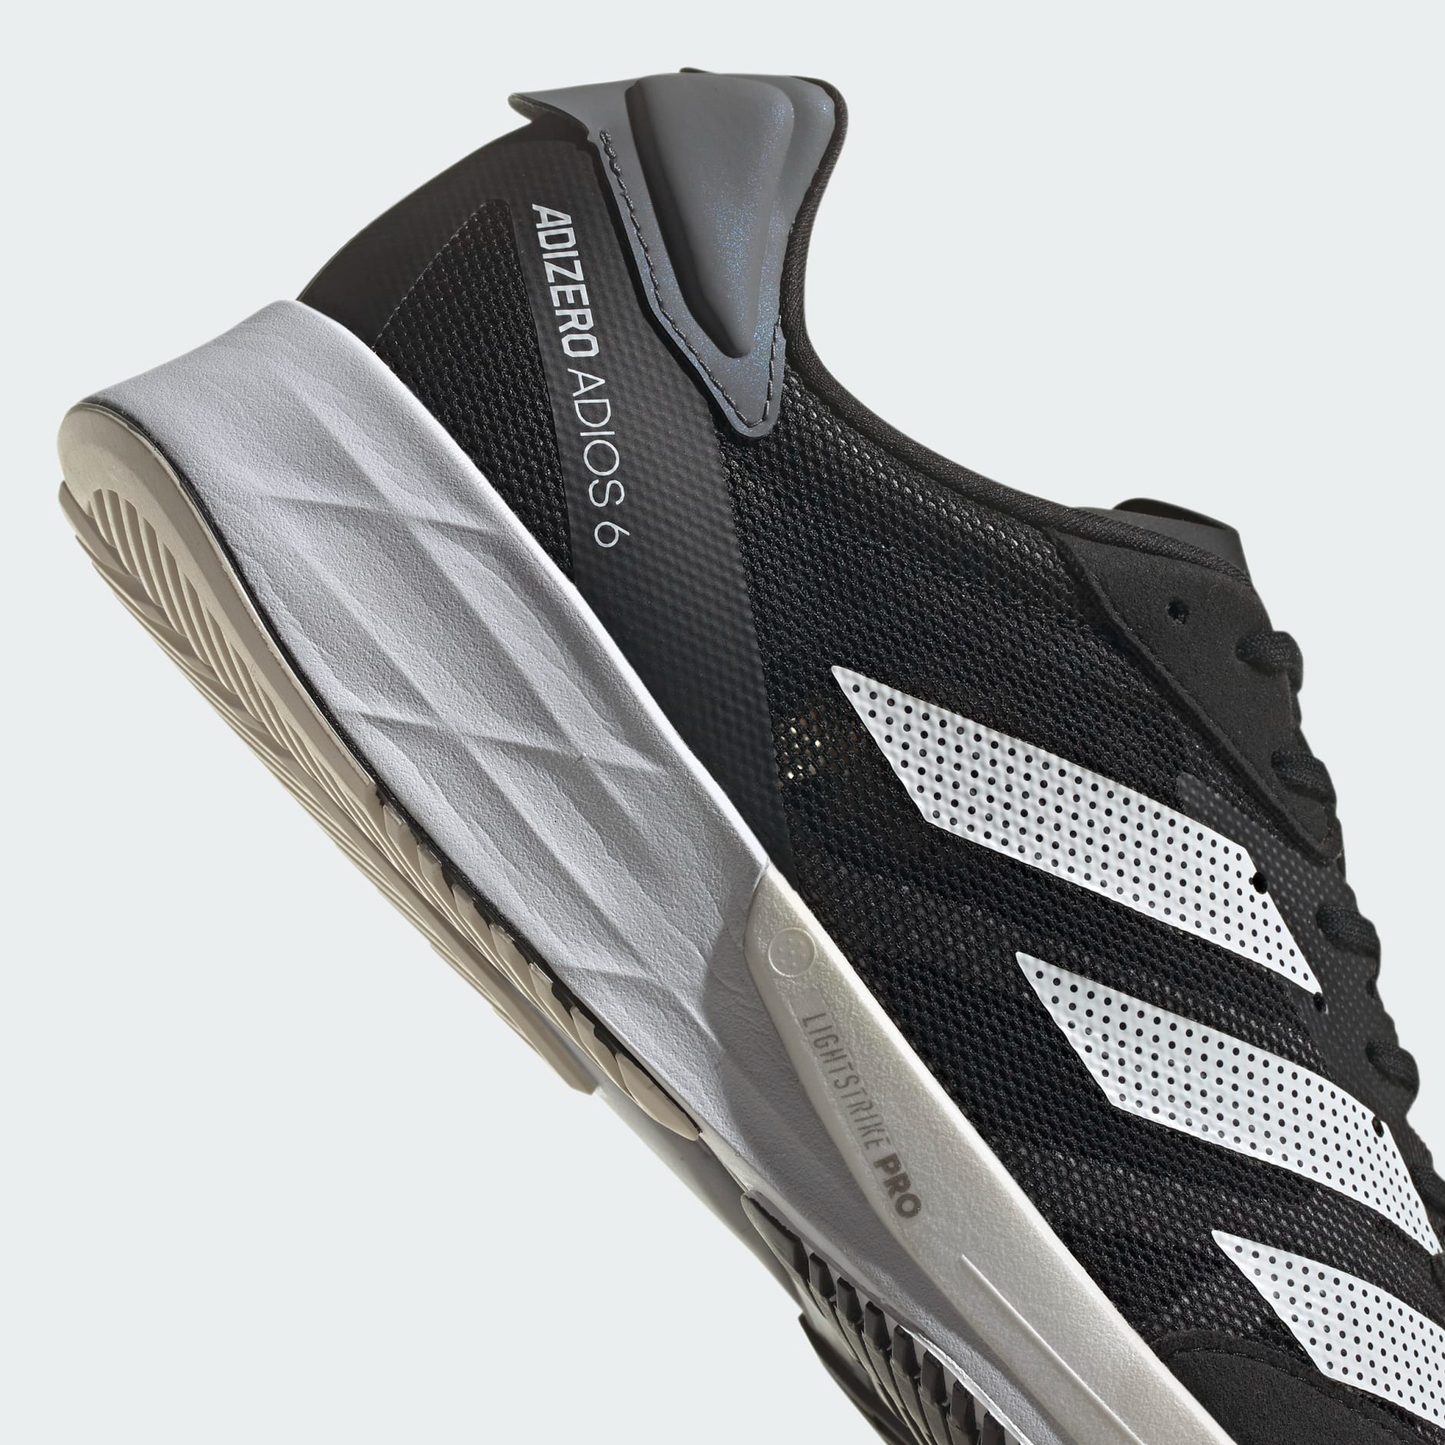 ADIZERO ADIOS PRO 2.0 SHOES RUNNING First Copy Shoes (Black)